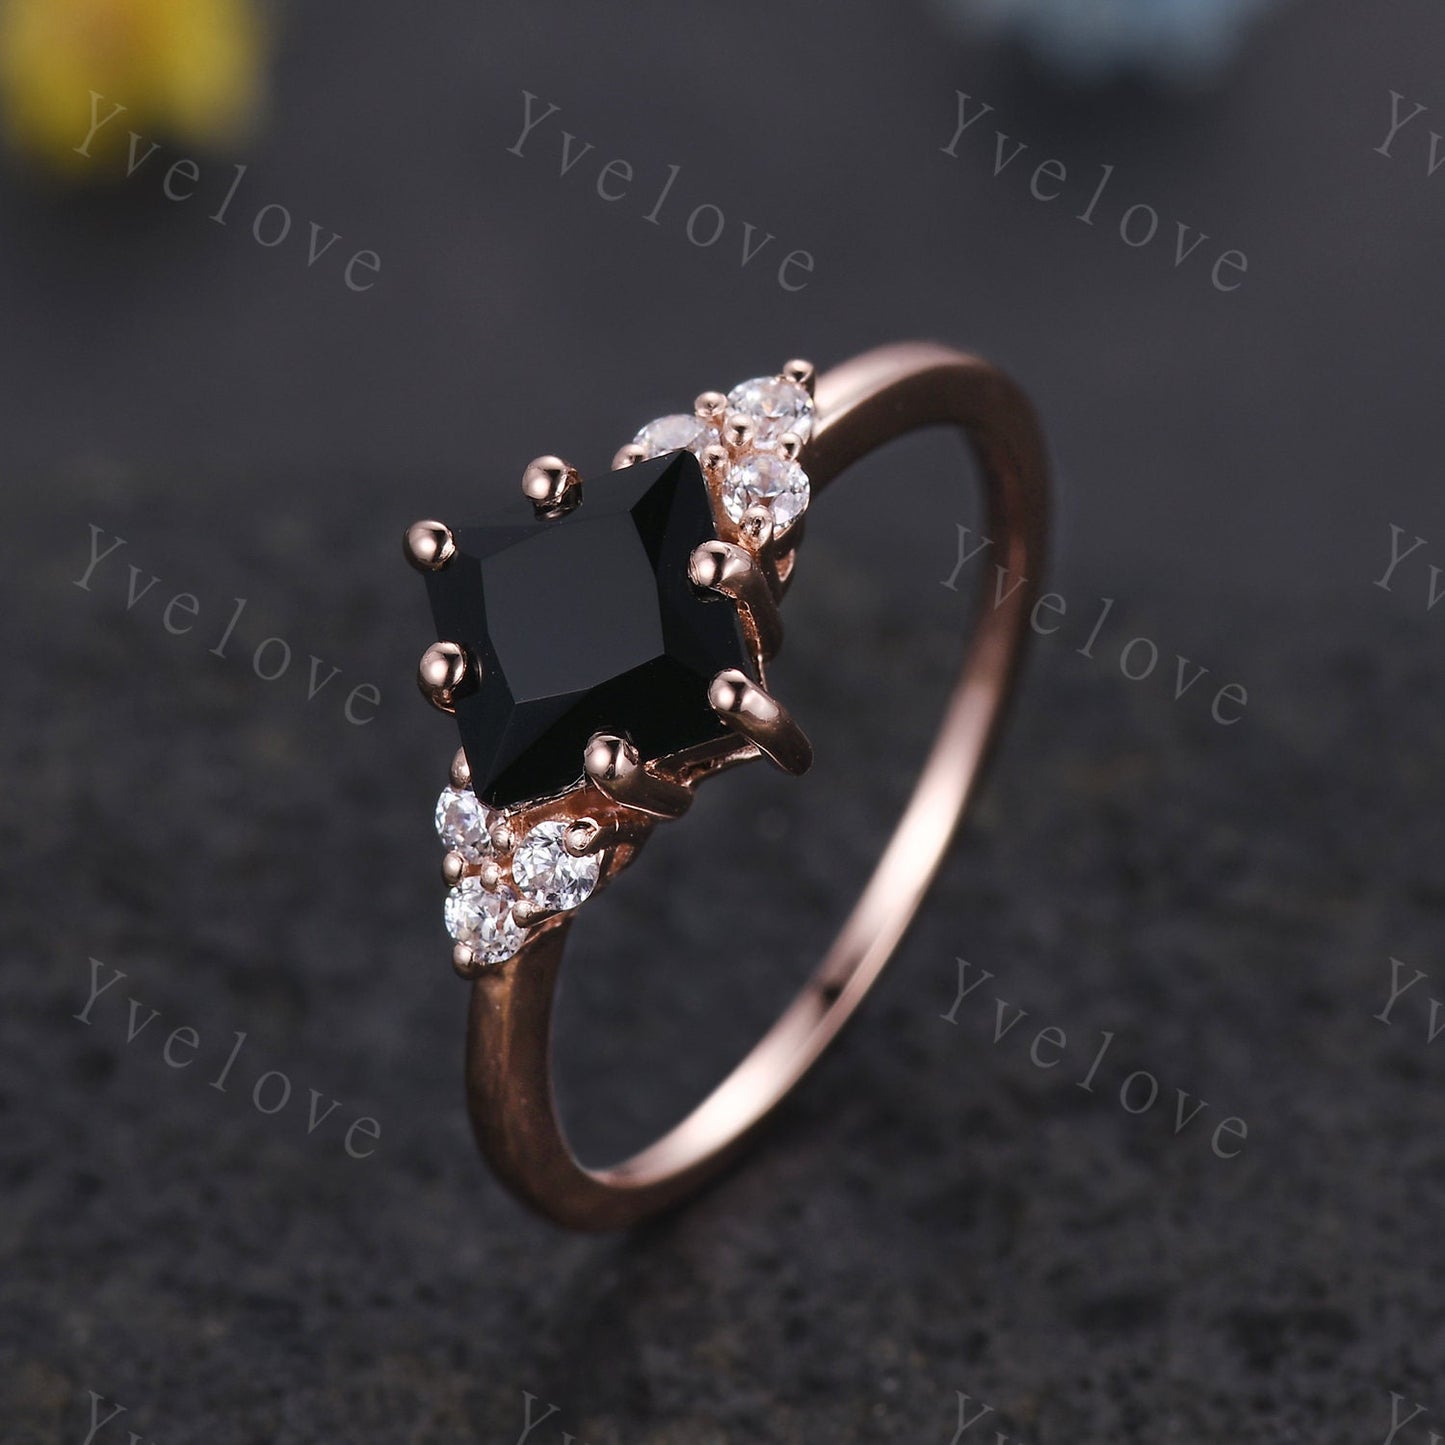 Vintage Retro Black Onyx Ring,6mm Princess Cut Onyx Engagement Ring,Moissanite Stacking band,Rose Gold,Women Promise Anniversary ring gift